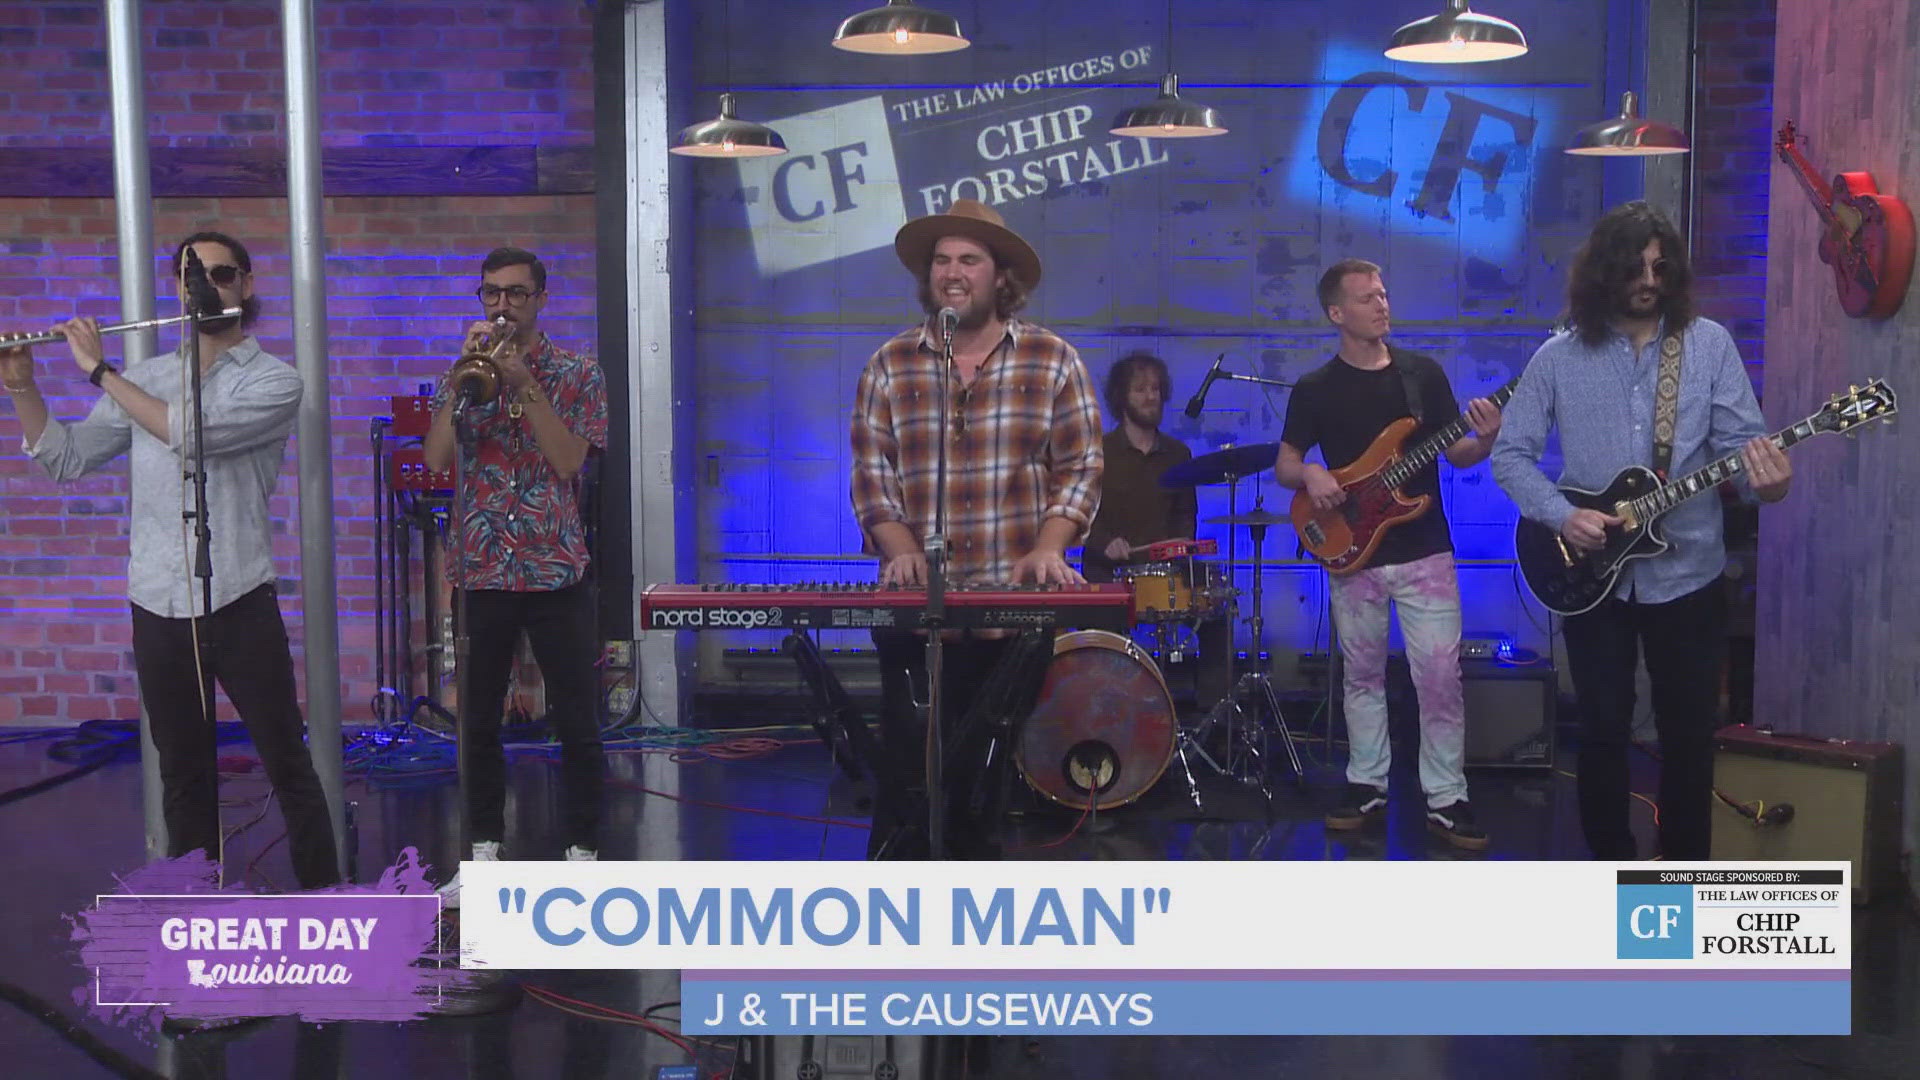 We meet the members of J & The Causeways and enjoy another song before they head out to Jazz Fest this weekend.